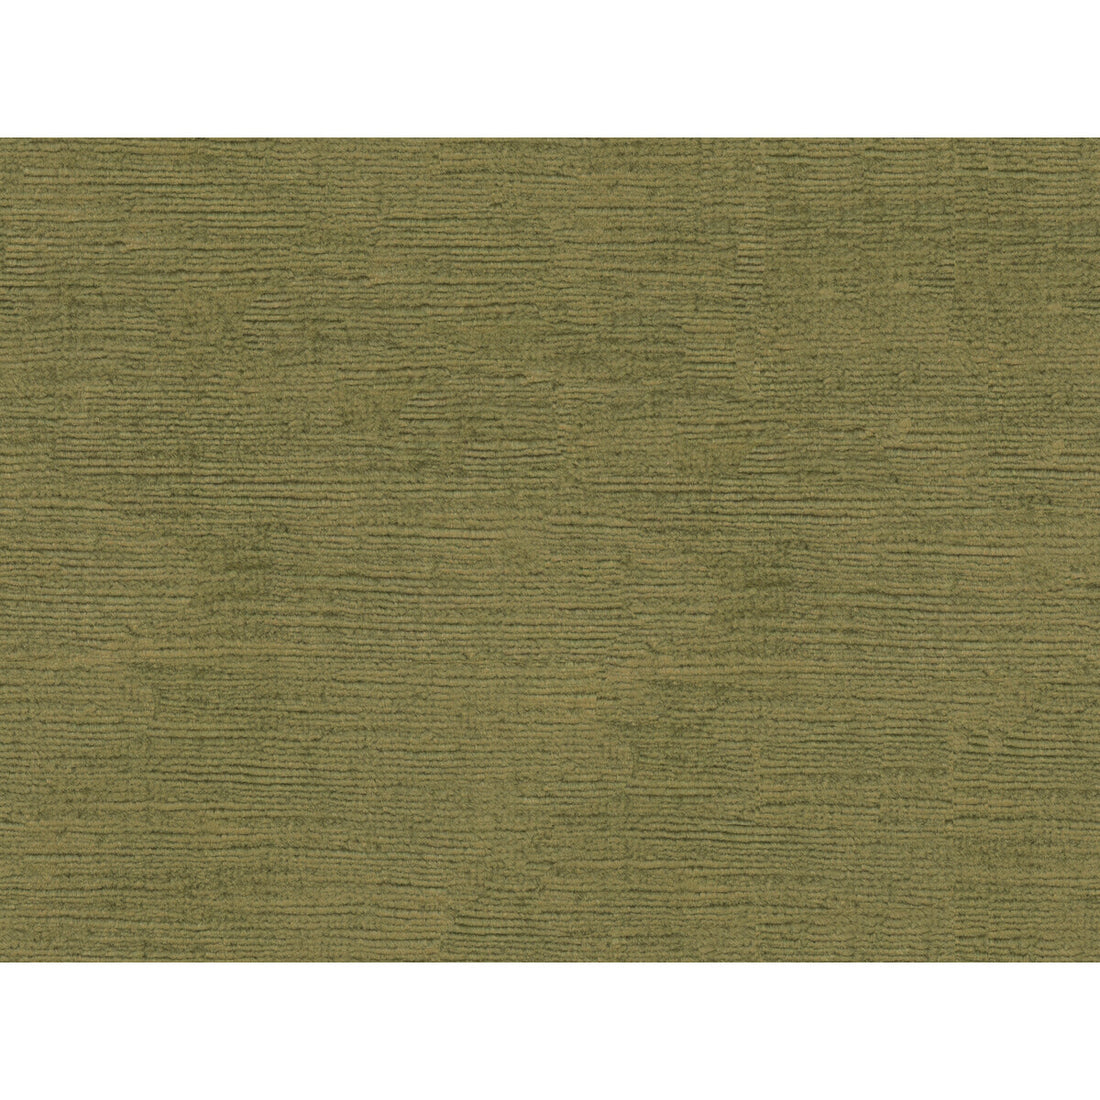 Fulham Linen V fabric in cactus color - pattern 2016133.1633.0 - by Lee Jofa